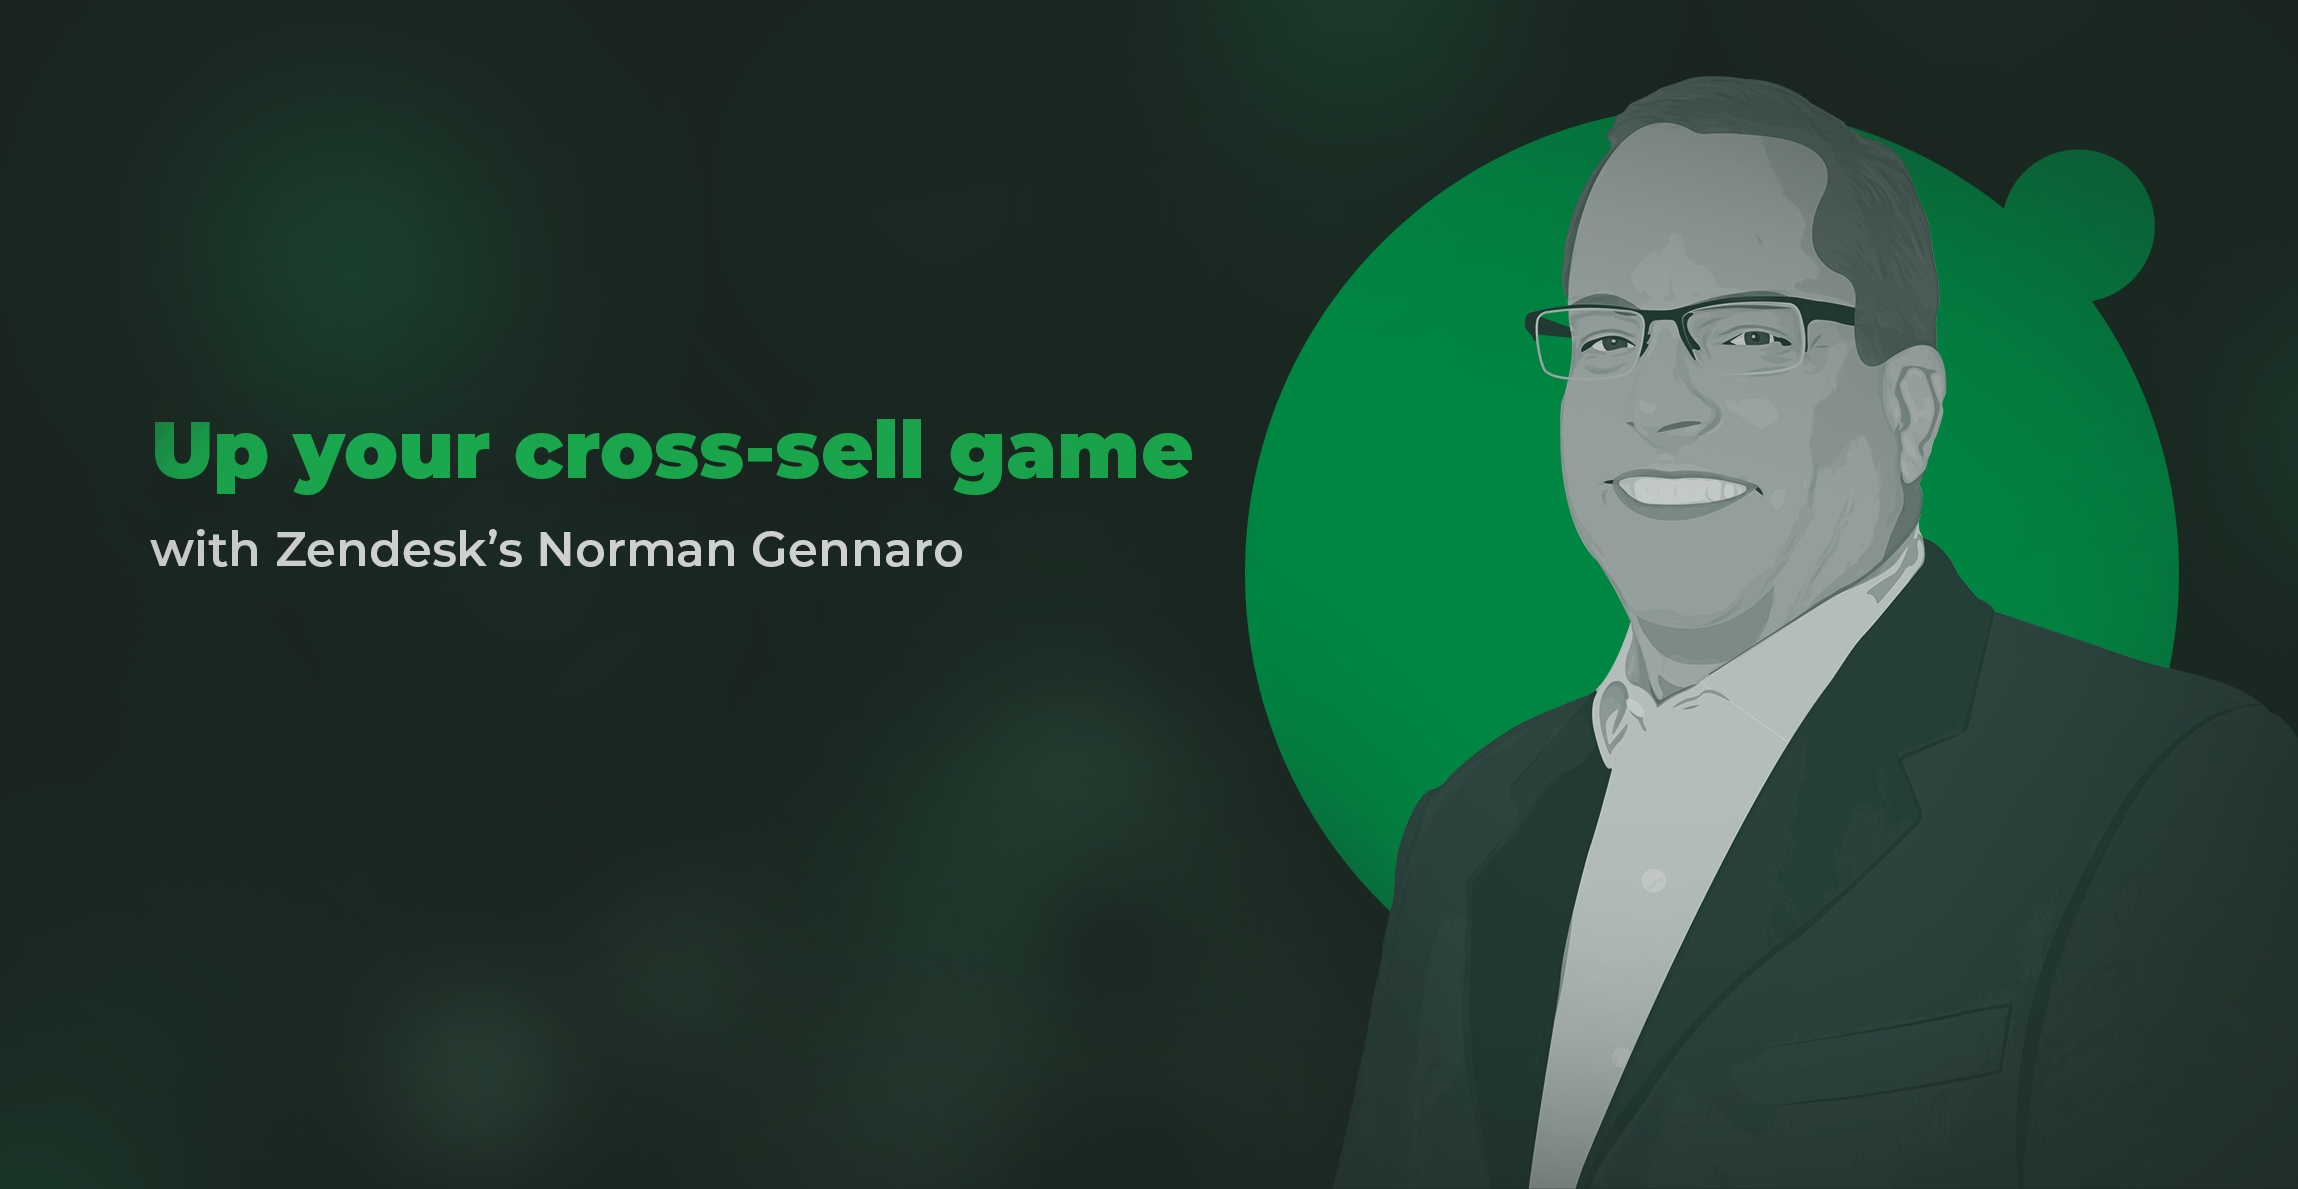 Up your cross-sell game, with Zendesk’s Norman Gennaro